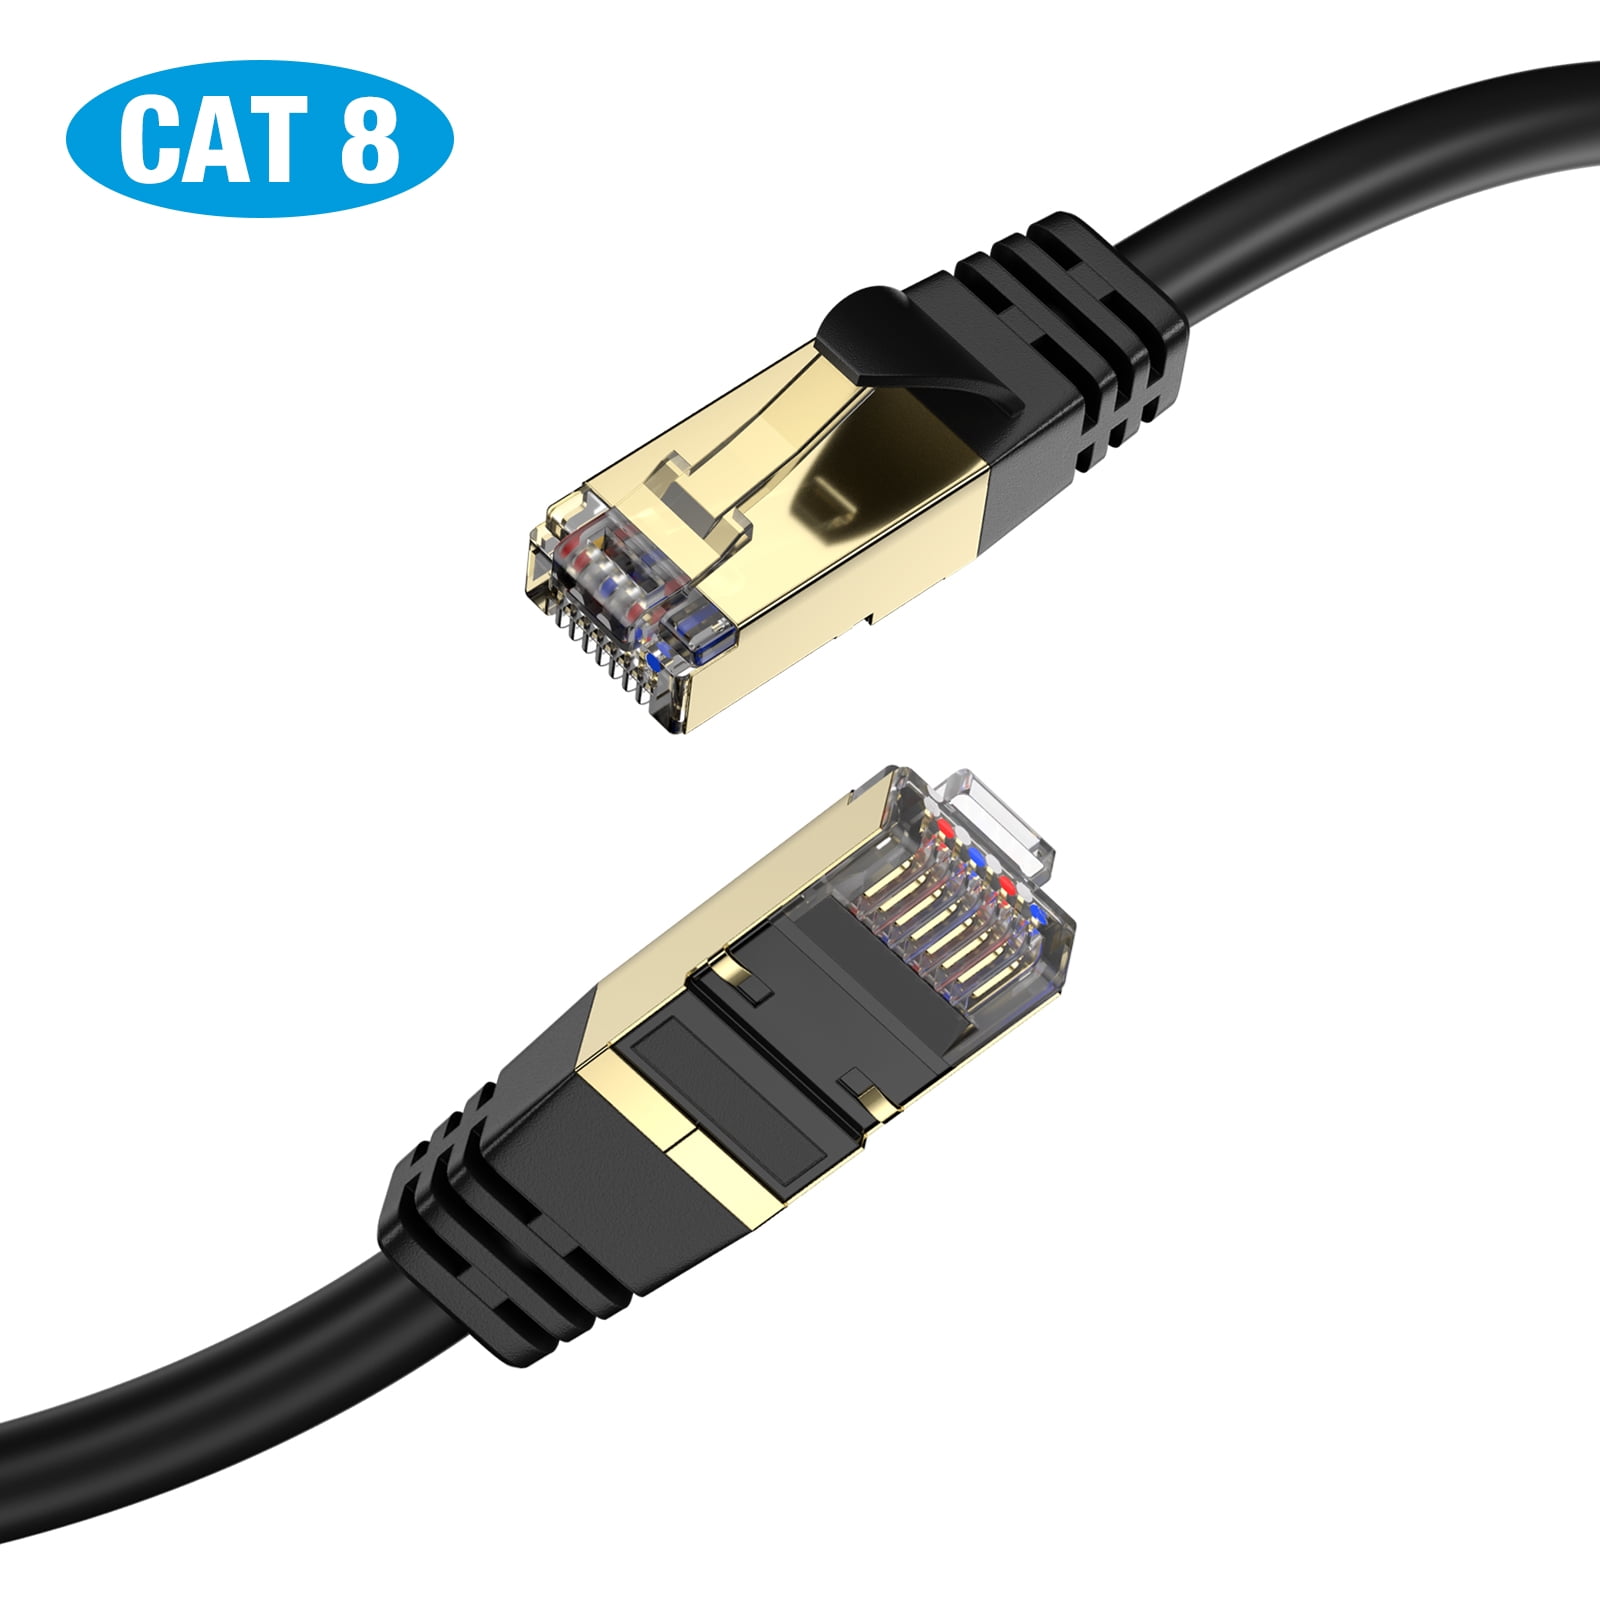 Ethernet Switch Cat8 Ethernet Cable 25ft Modem,Router Black HQGC Flat LAN Cable Internet Wire 40Gbps 2000MHz with RJ45 Connectors for Gaming 